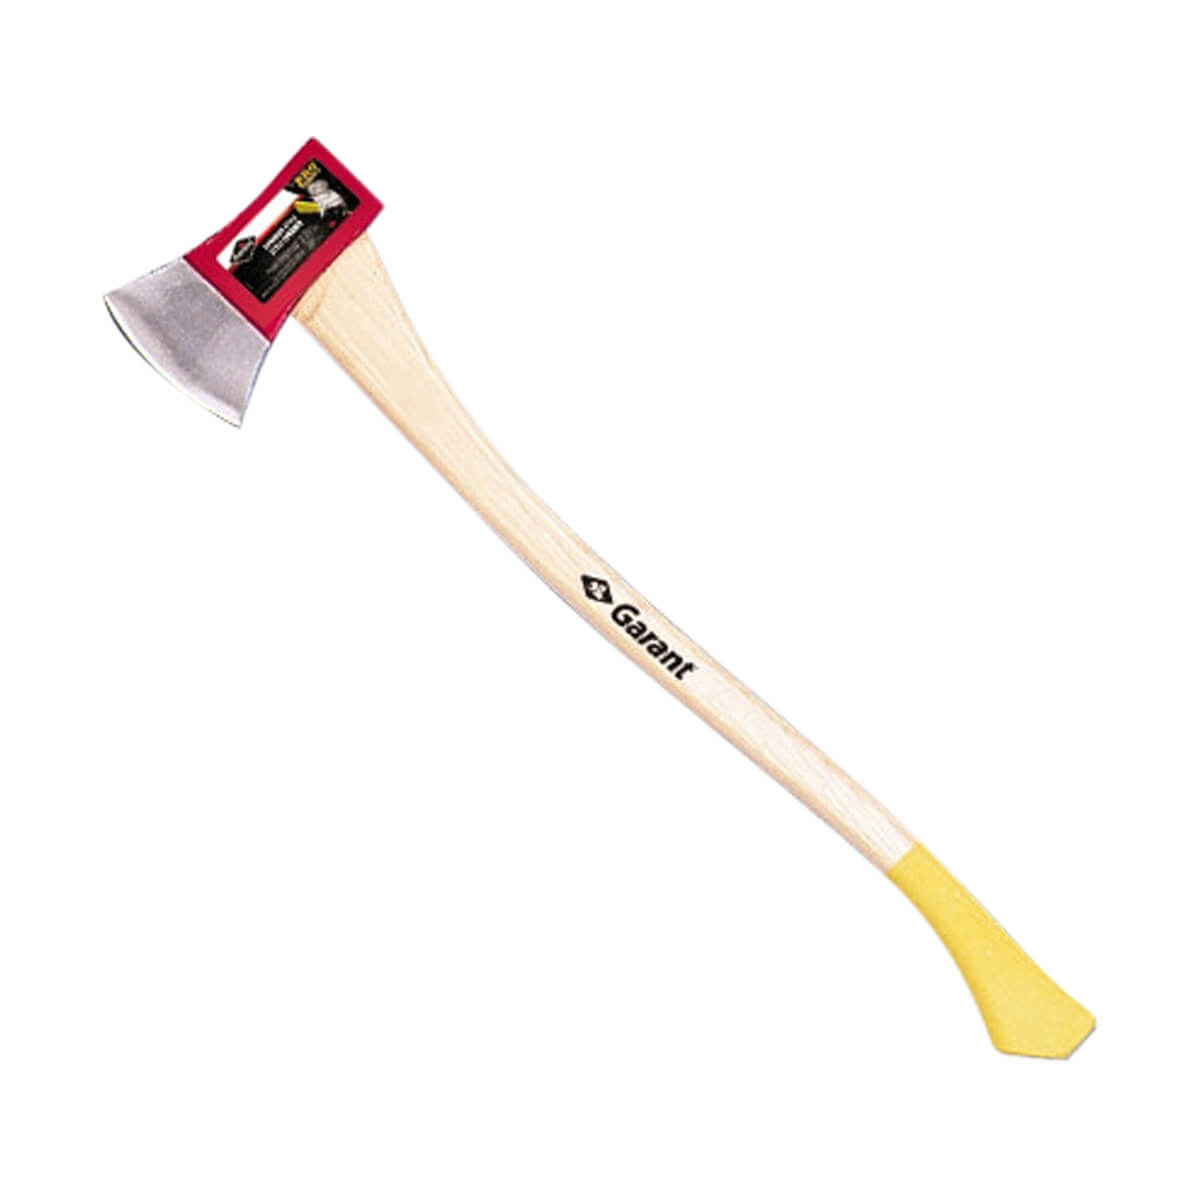 Canadian Axe with Safety Grip - 2.25 lbs